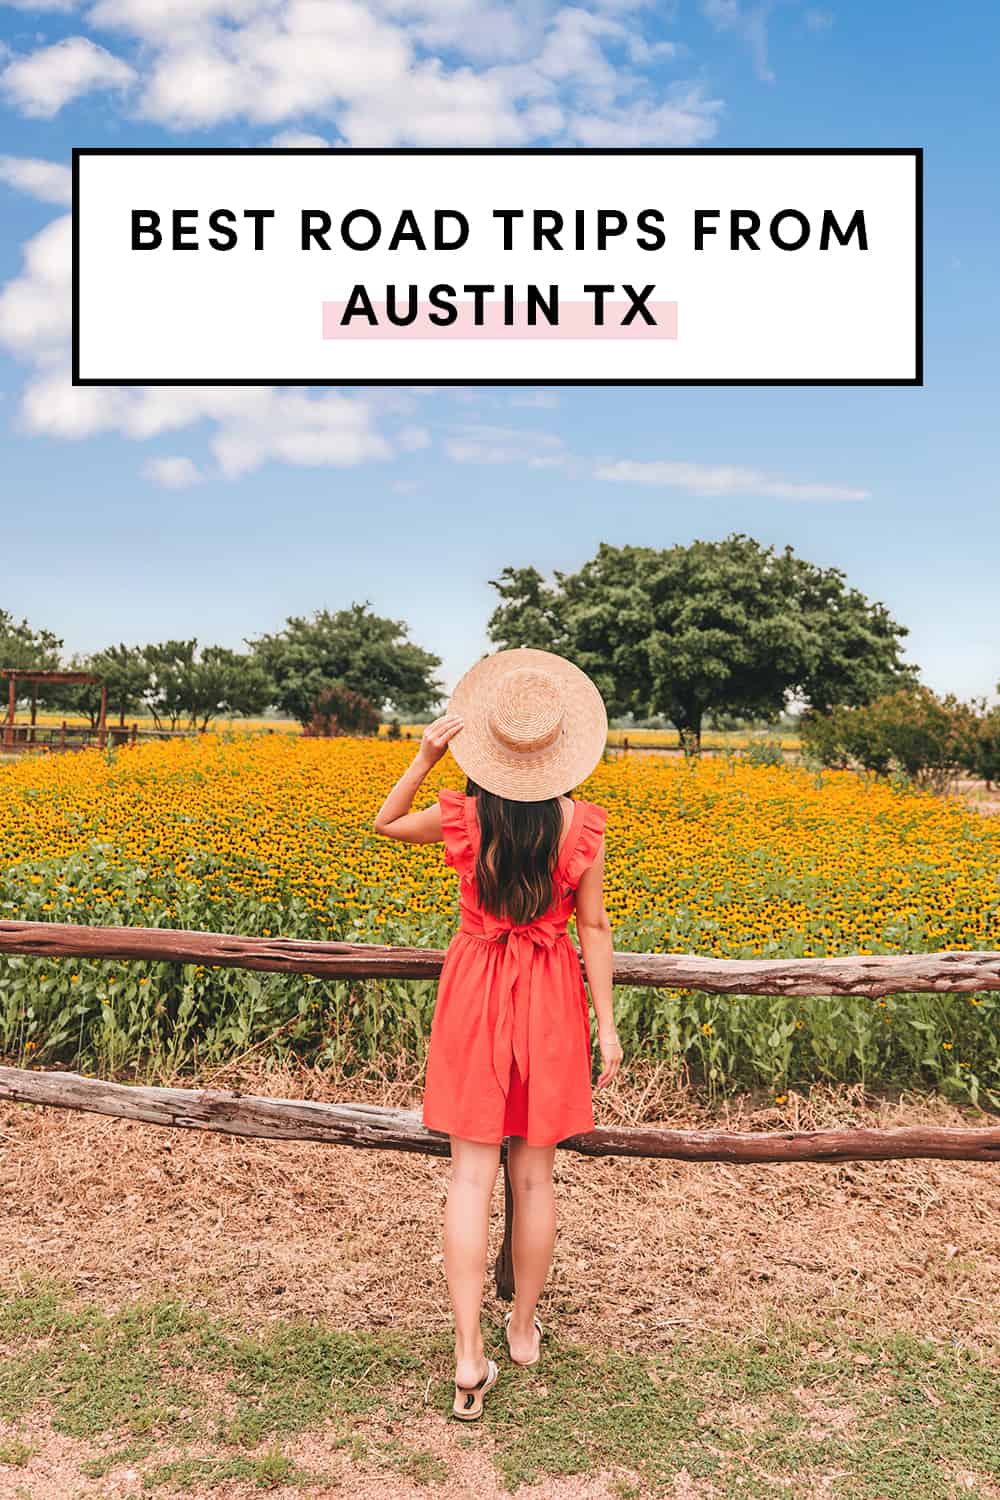 Best Road Trips From Austin